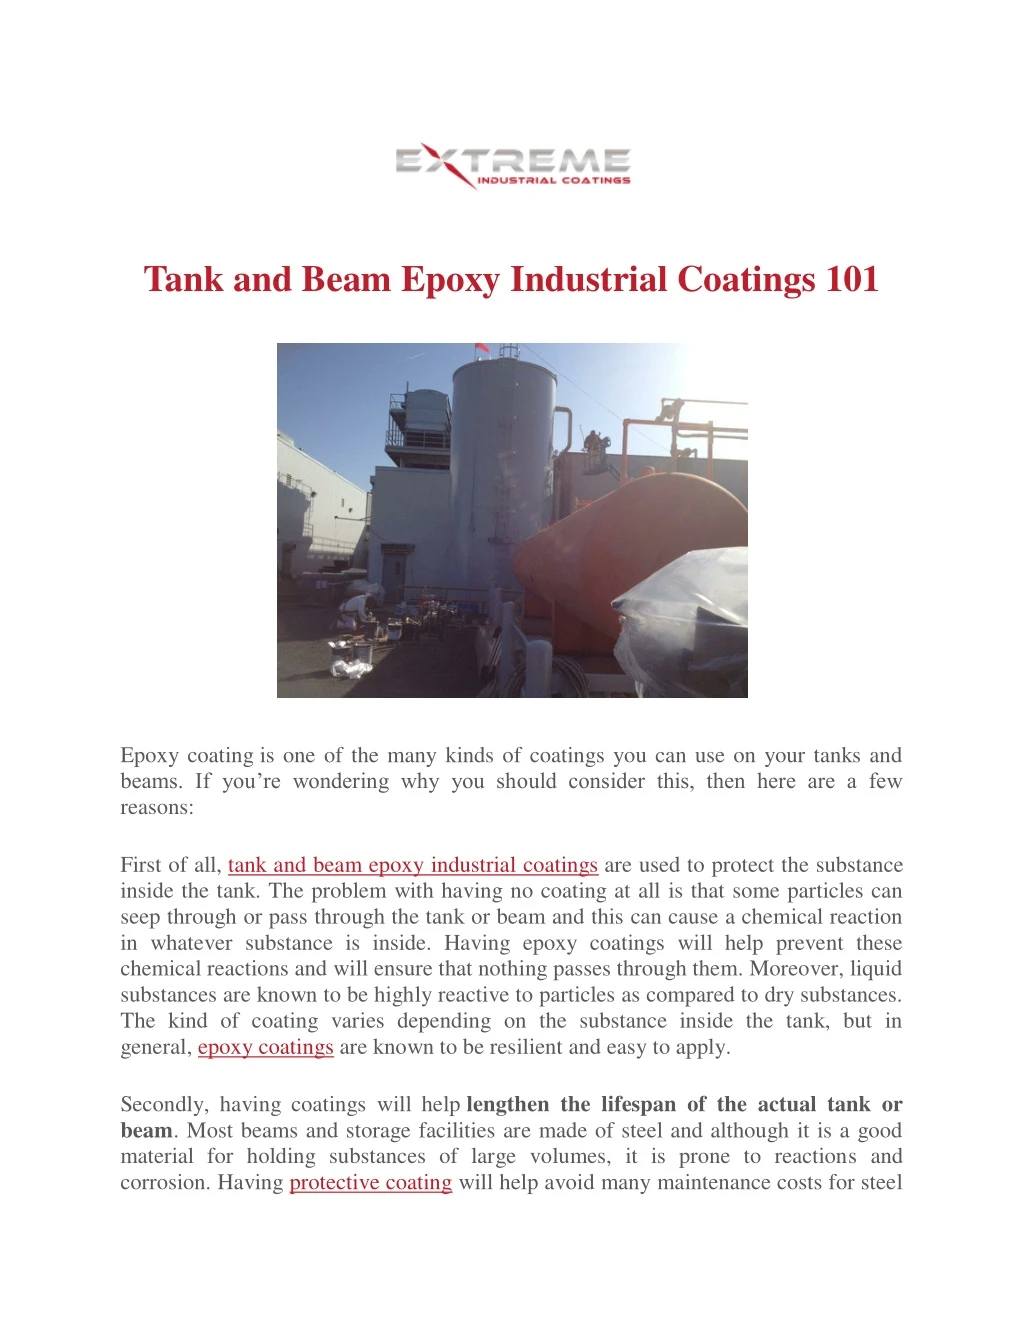 tank and beam epoxy industrial coatings 101